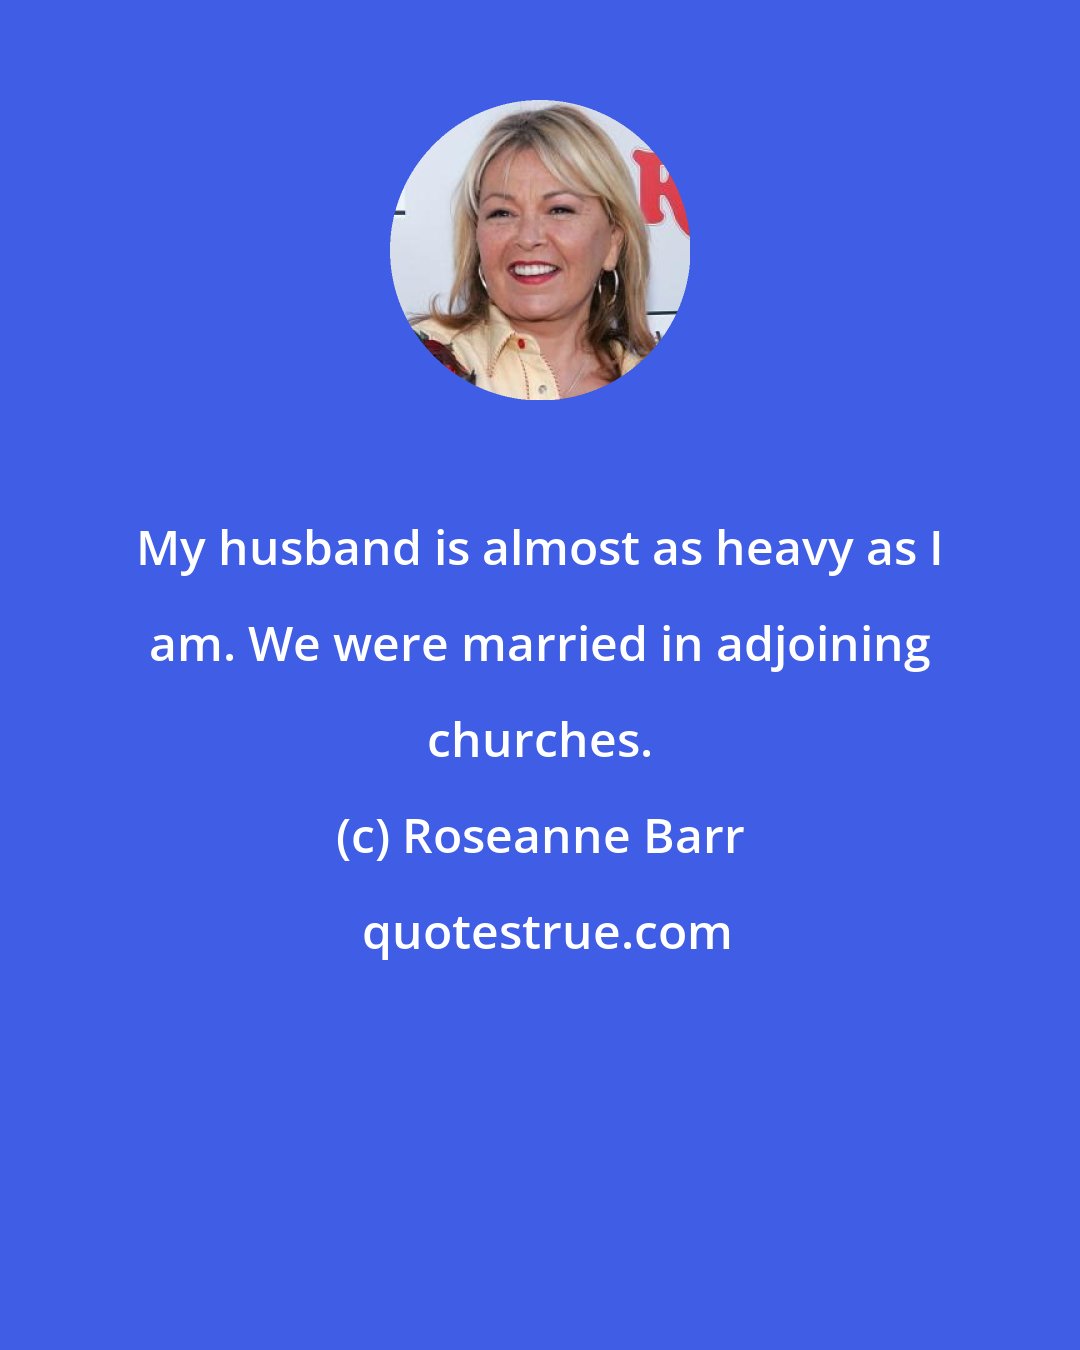 Roseanne Barr: My husband is almost as heavy as I am. We were married in adjoining churches.